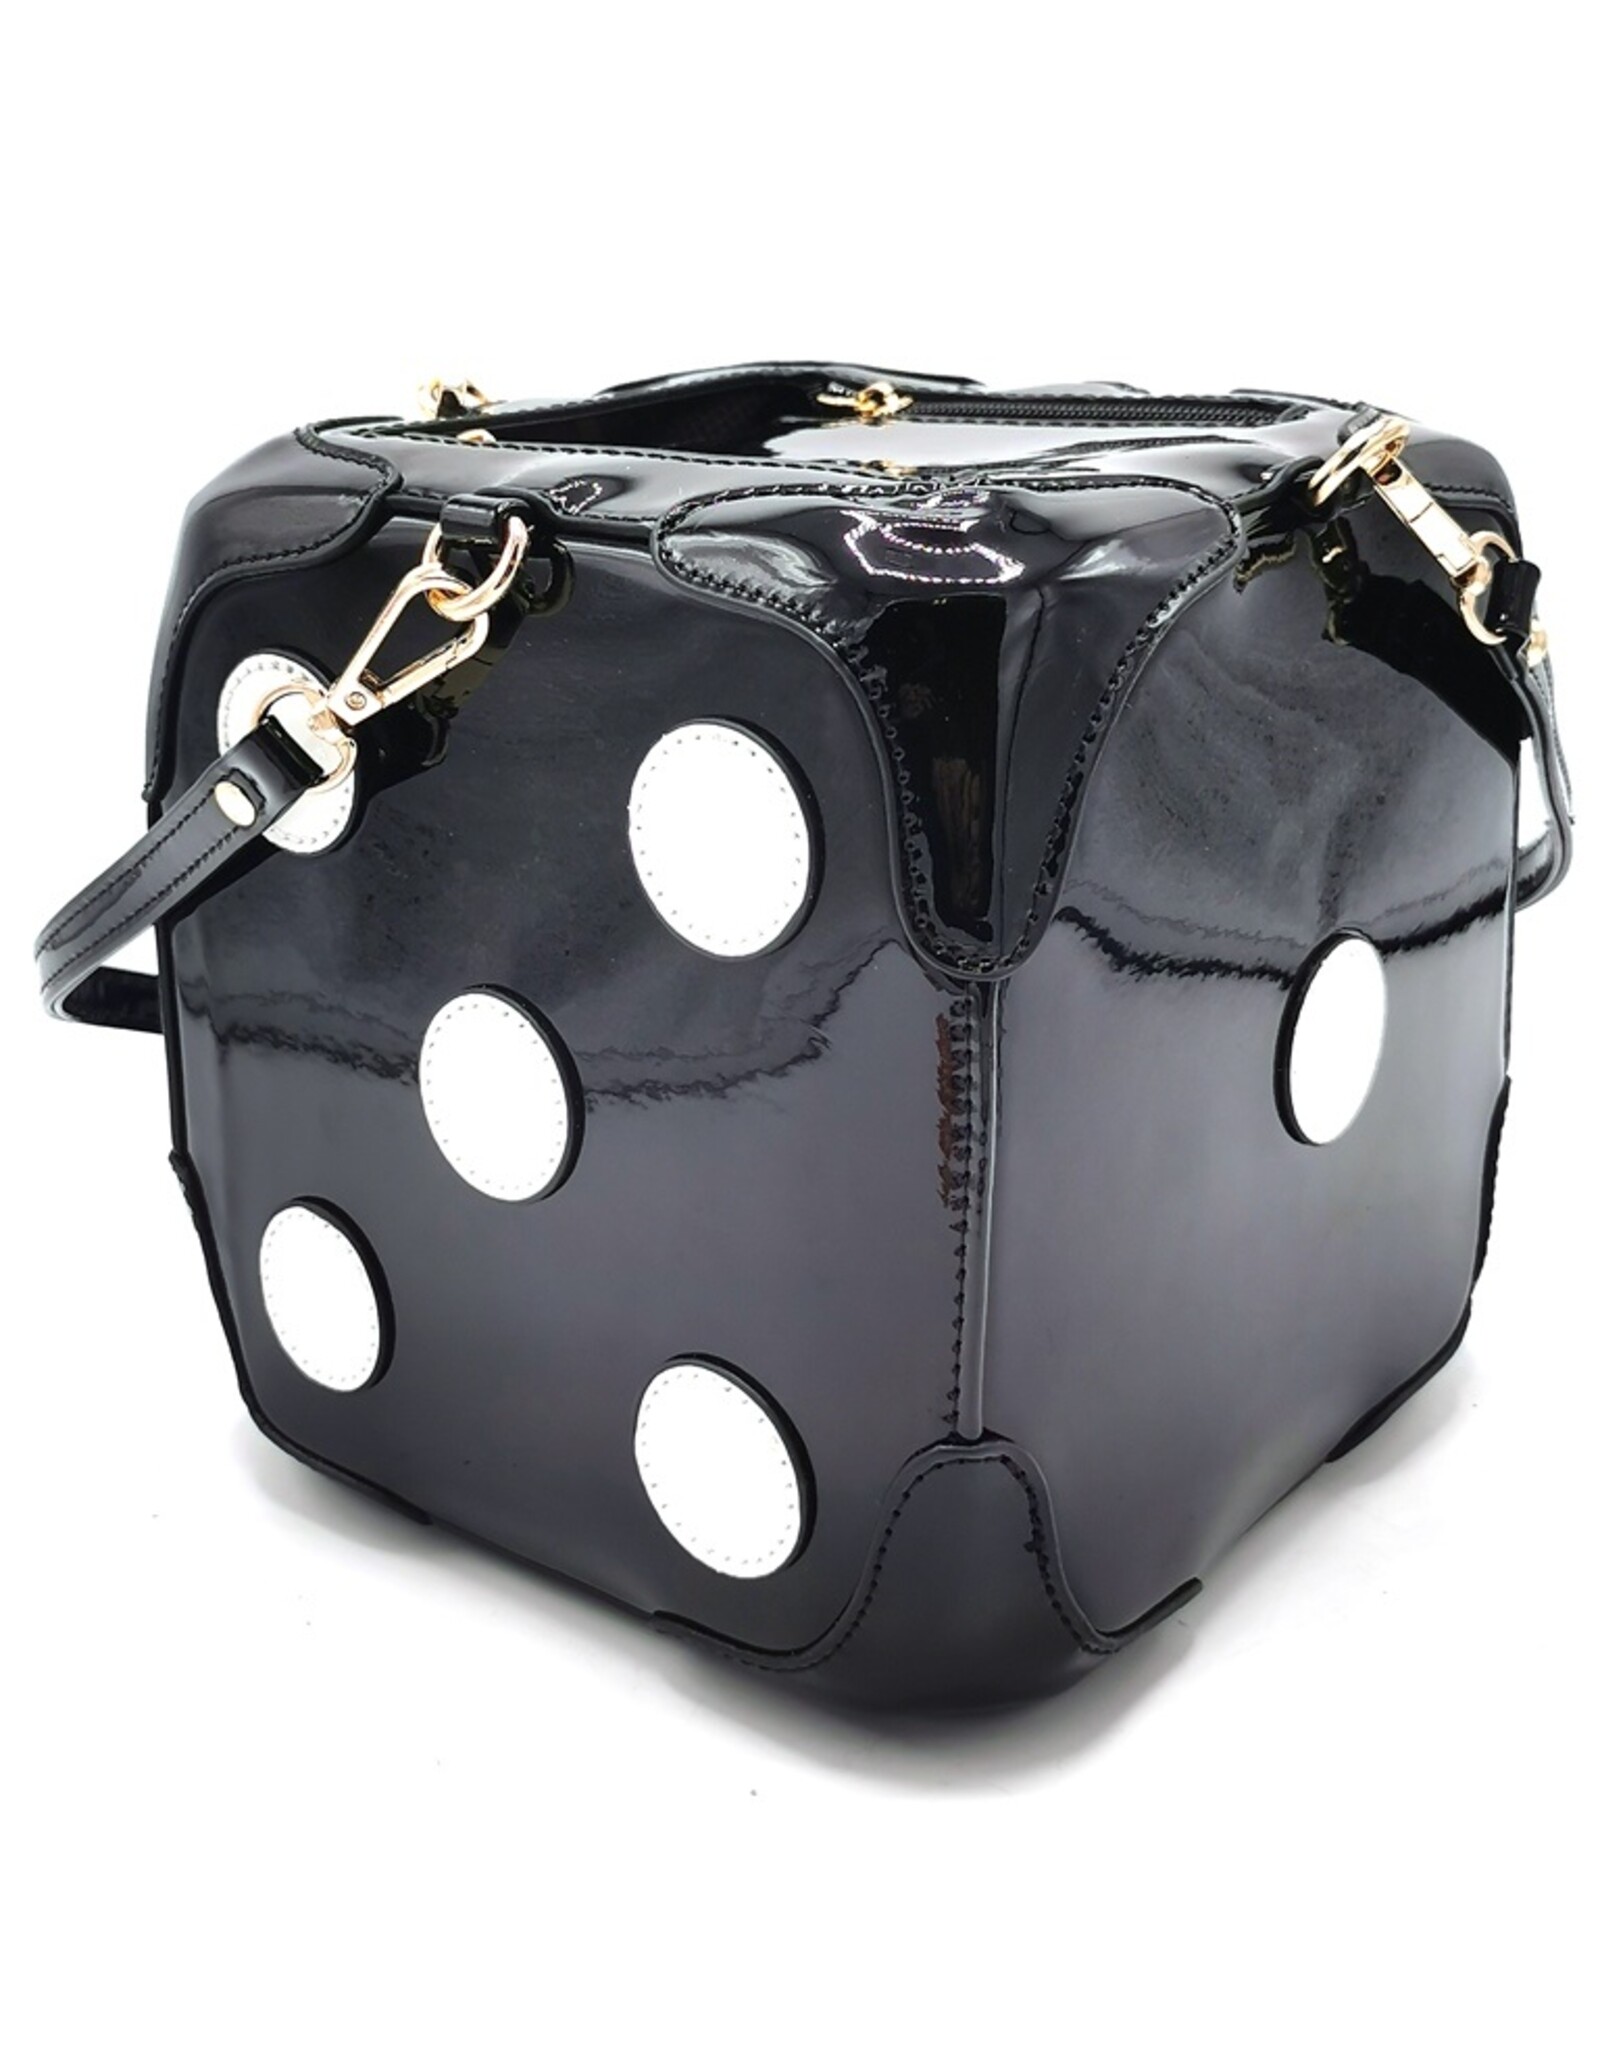 Systyle Fantasy bags - Fantasy bag Dice Black-White